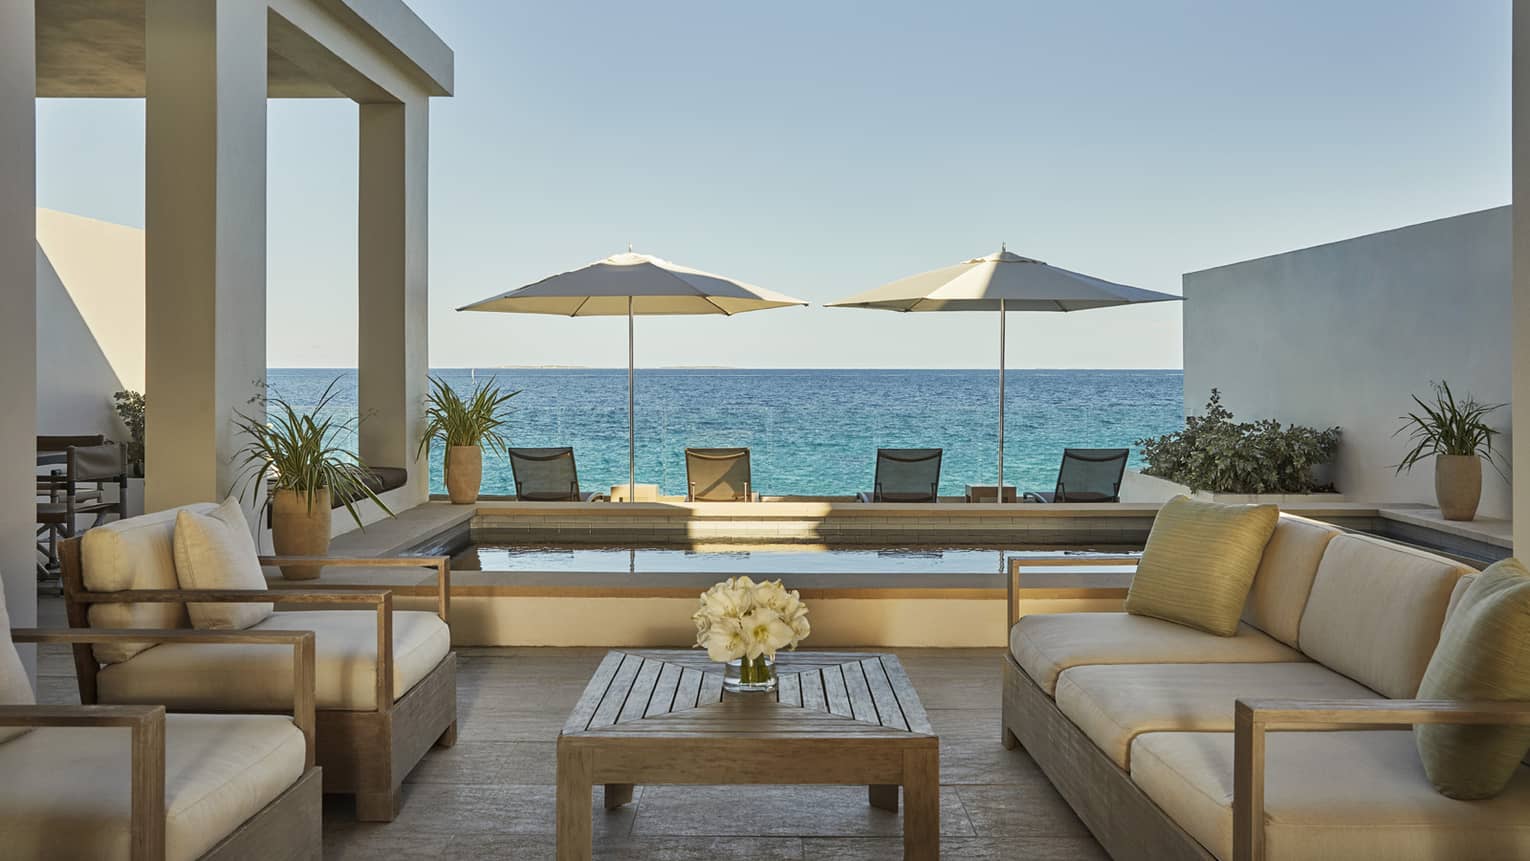 Outdoor patio living room with sofas, armchairs with white cushions, plunge pool, patio chairs and umbrellas, ocean